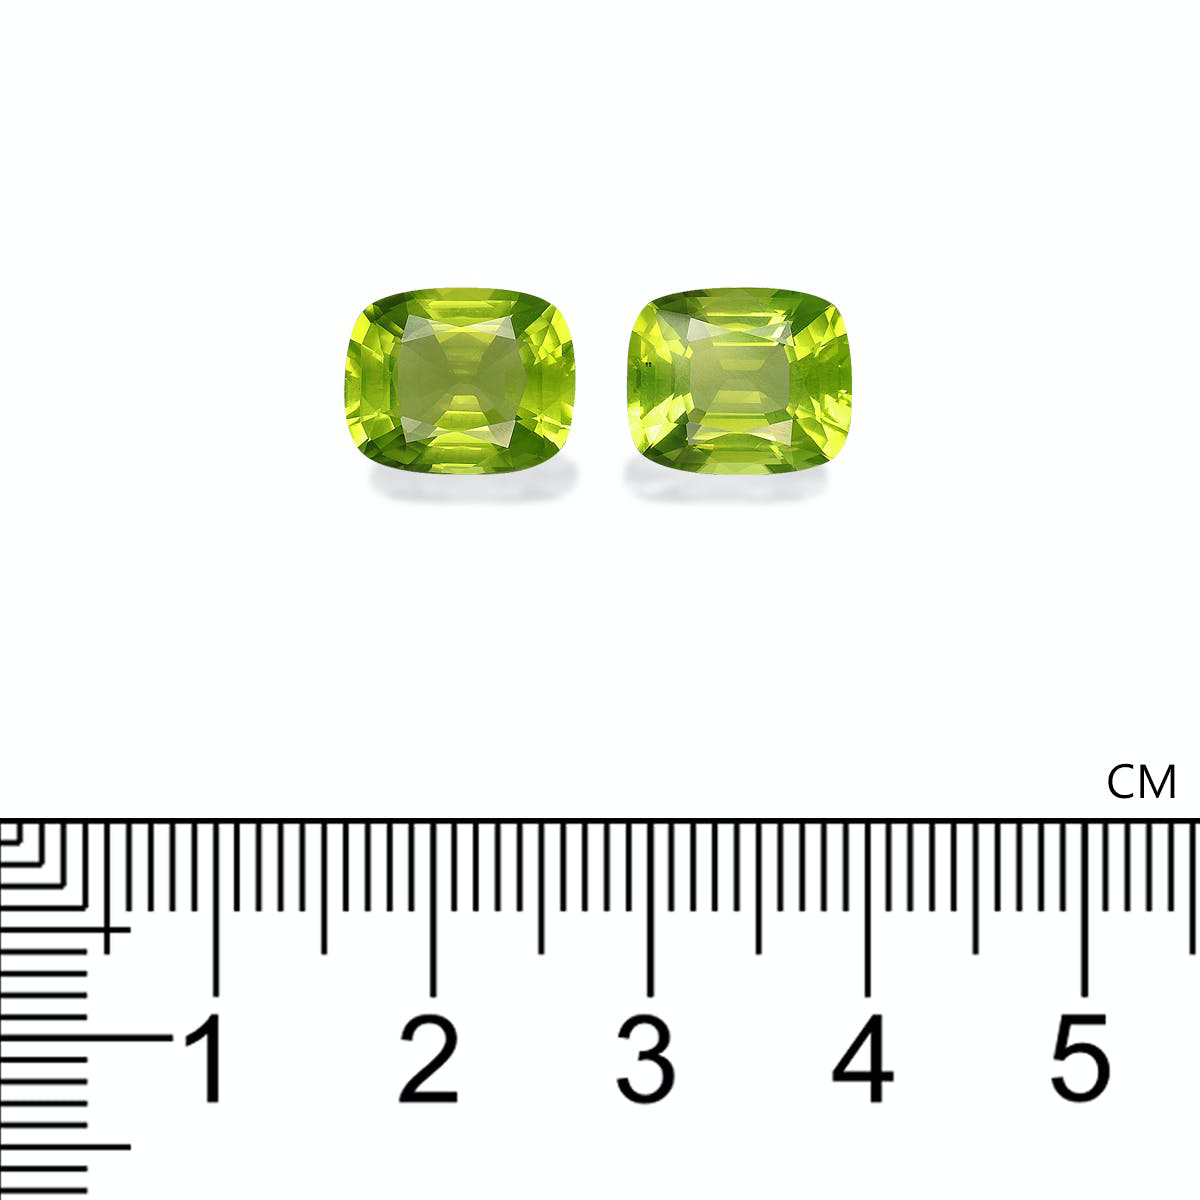 Picture of Lime Green Peridot 8.79ct - 11x9mm Pair (PD0084)